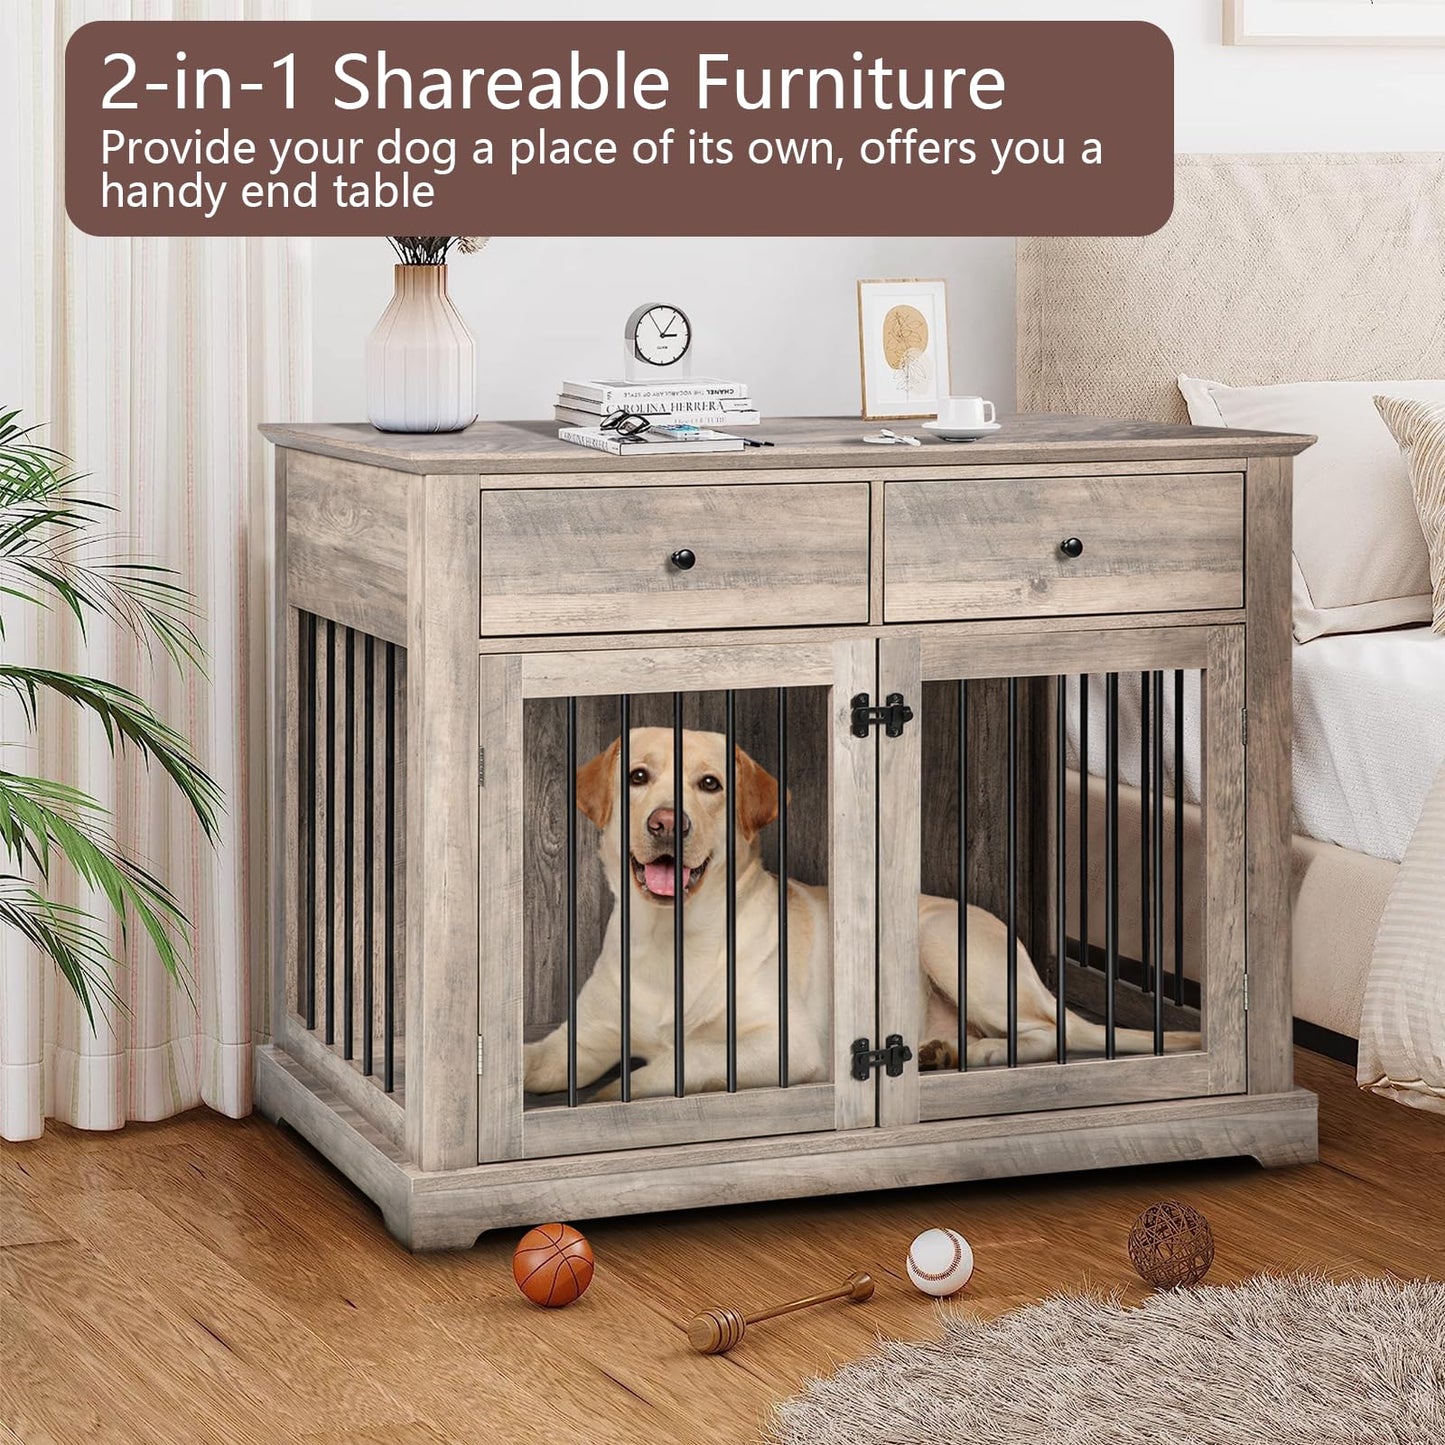 TAVATA Dog Crate Furniture with 2 Drawer, 44'' Large Dog Crate Dog Kennel, Heavy Duty Wood Dog Cage Dog House for Small/Medium/Large Dog, Sturdy Dog Kennel Dog Crate (Grey)